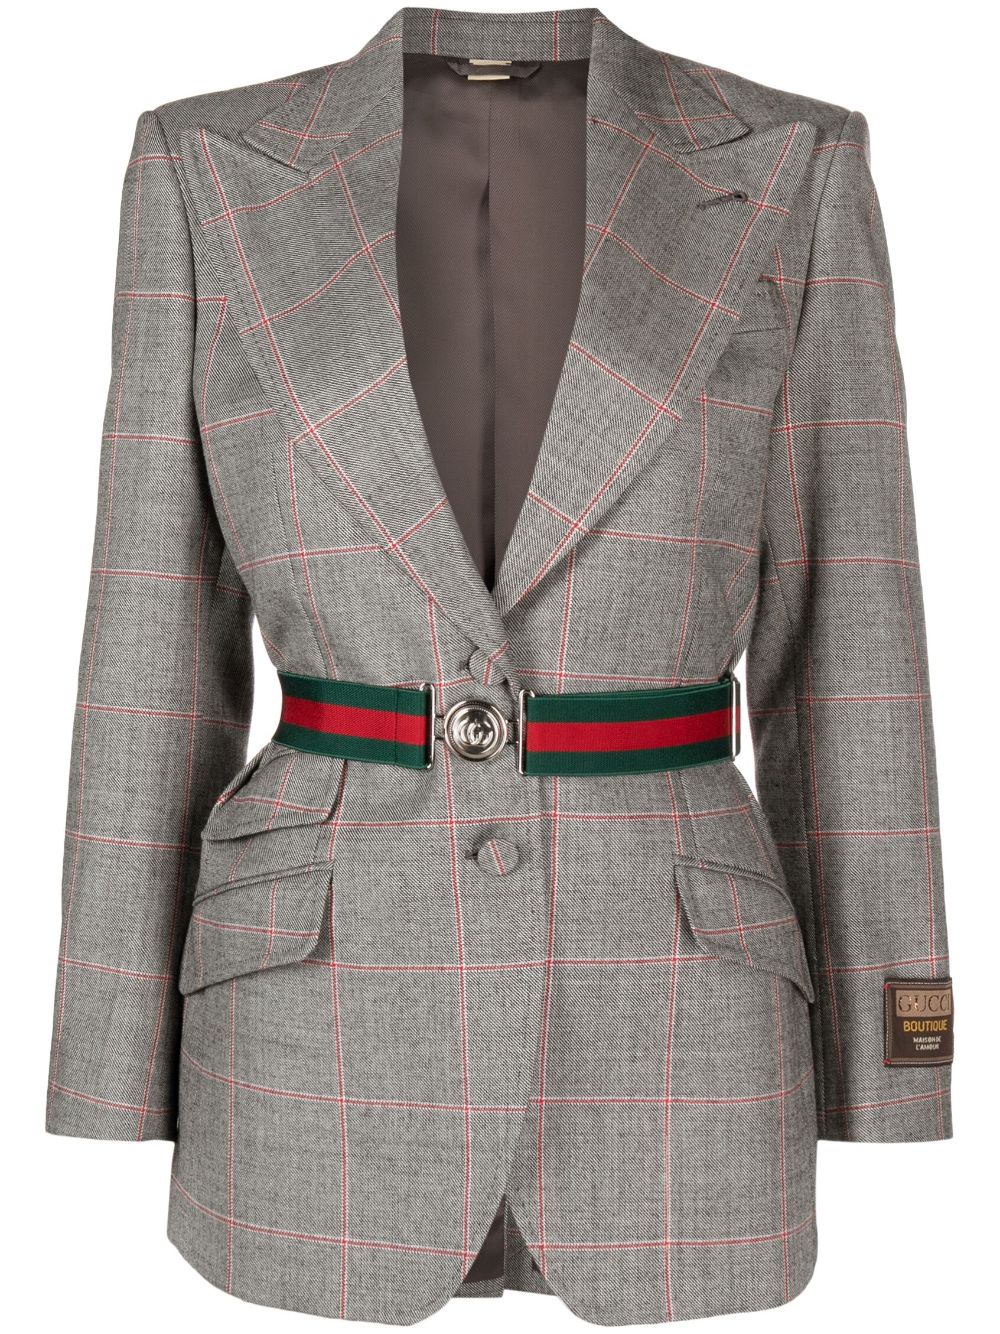 GUCCI Belted Check Blazer Jacket for Women